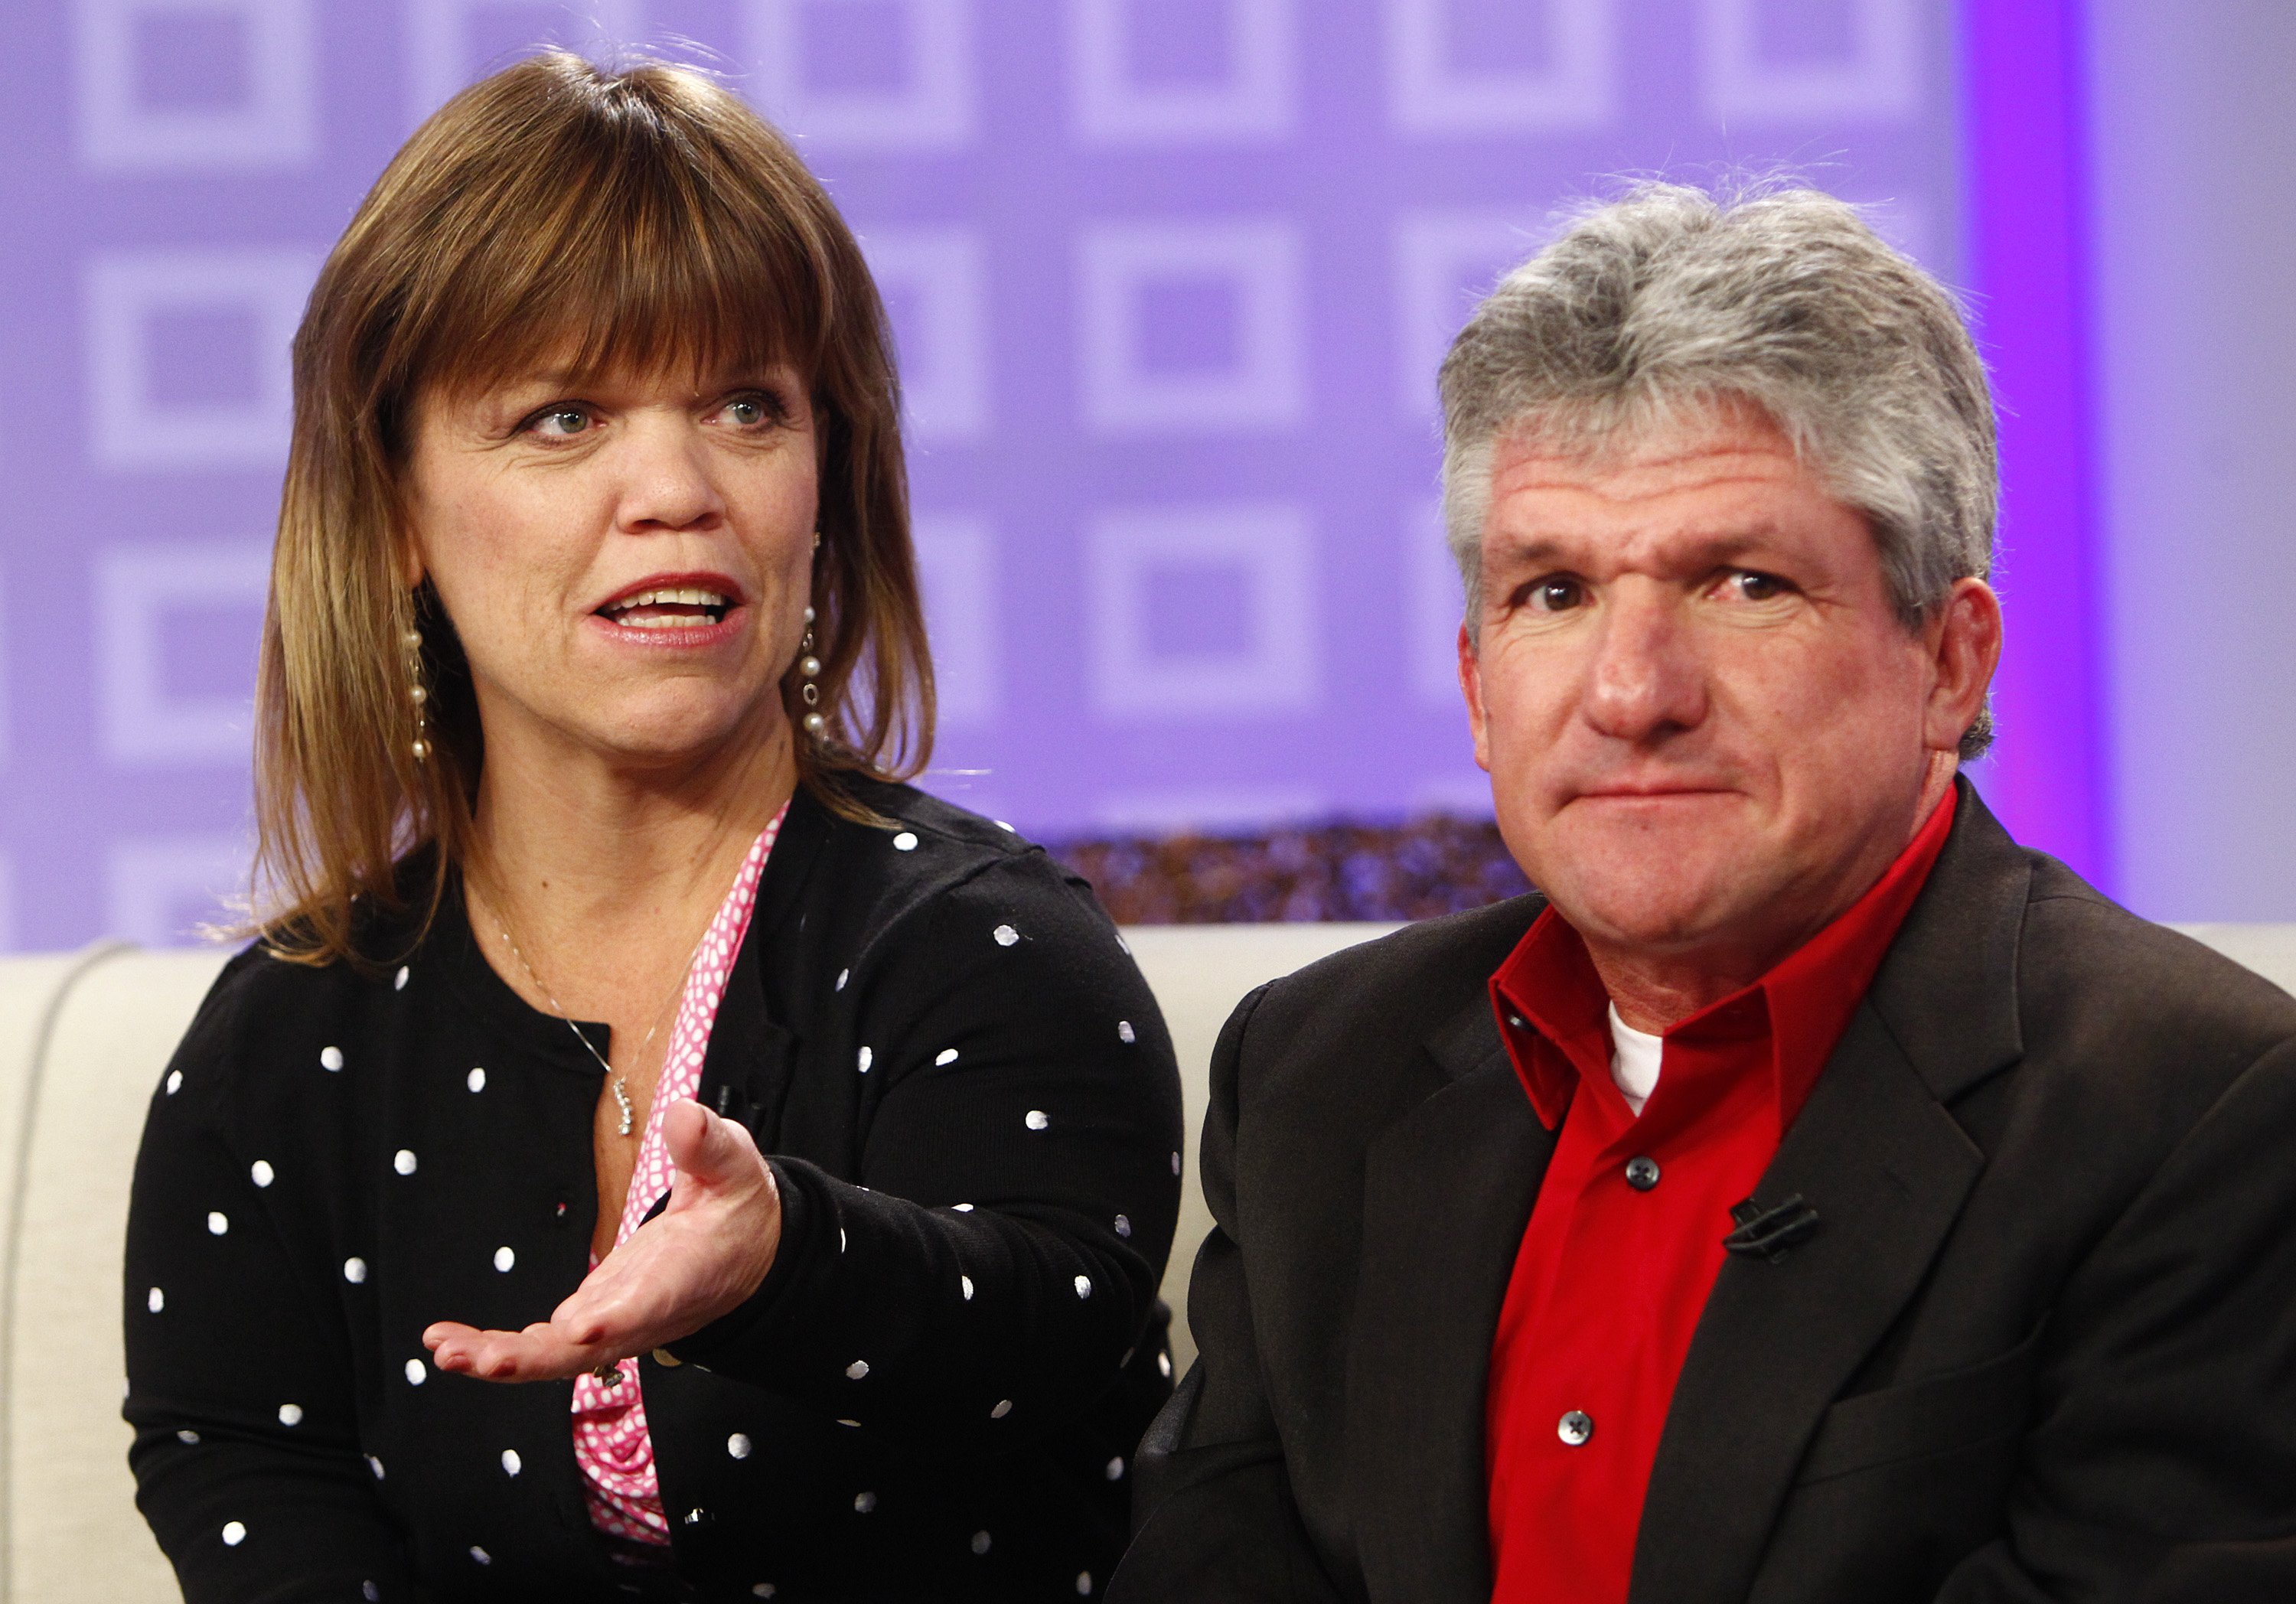 Amy Roloff and Matt Roloff on the "Today" show on February 16, 2012 | Source: Getty Images